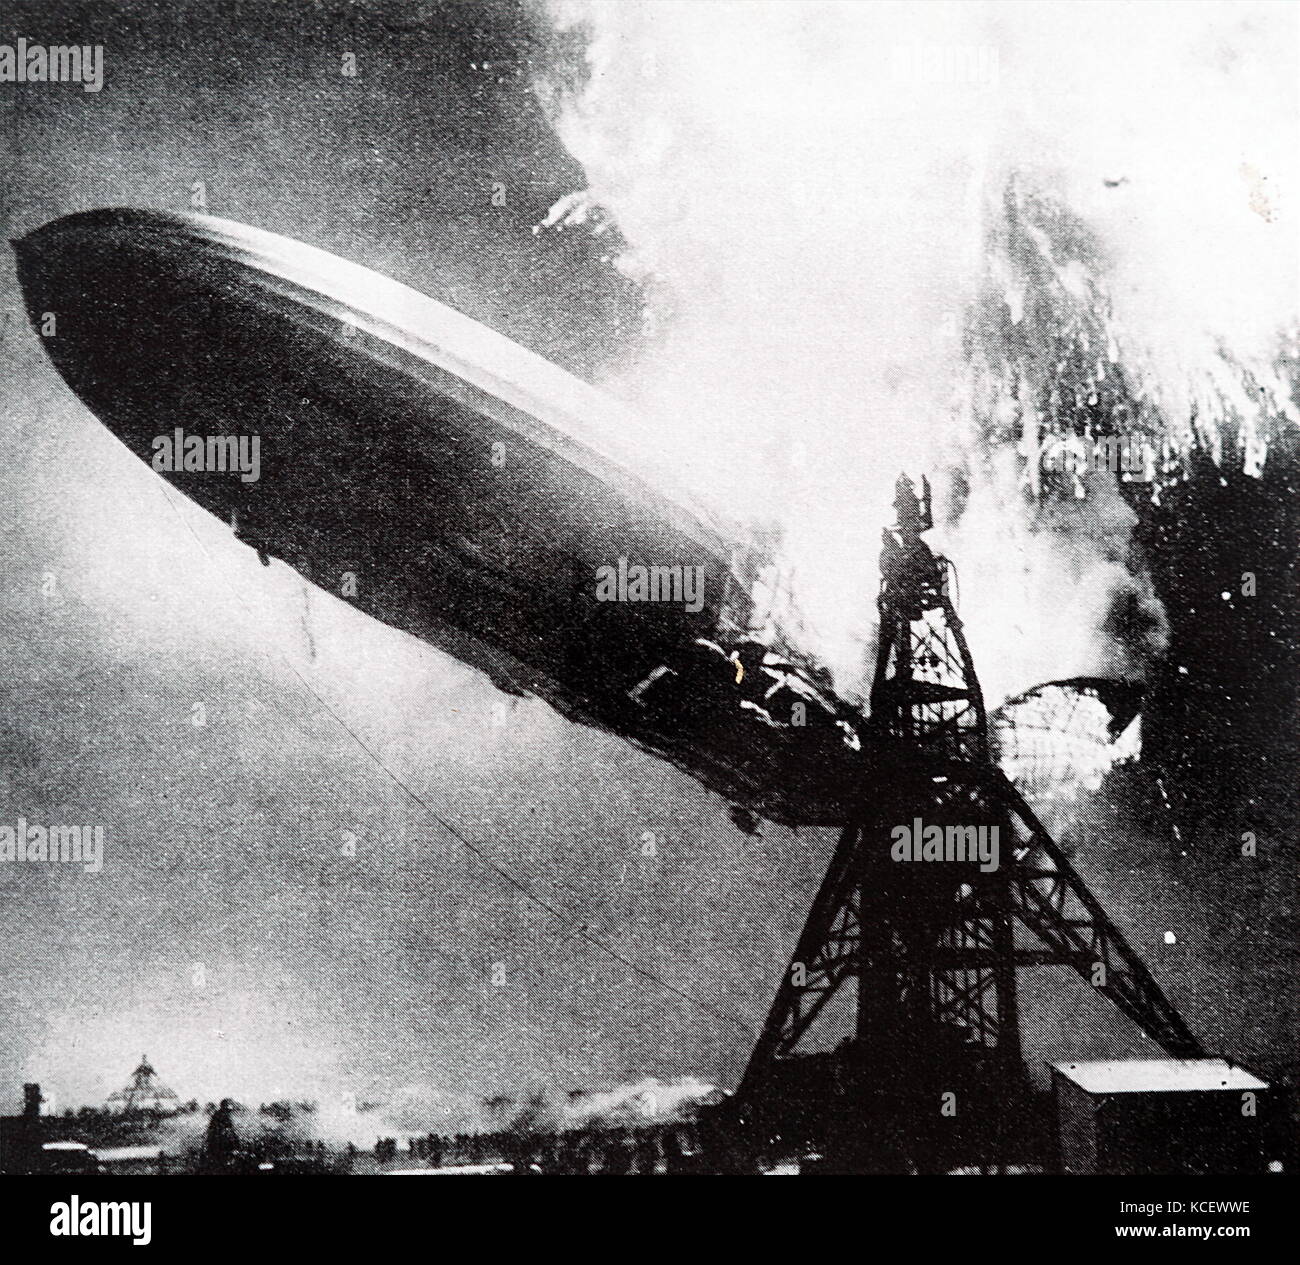 Photograph taken during the Hindenburg disaster. A German passenger airship LZ 129 Hindenburg caught fire and was destroyed whilst attempting to dock at the Naval Air Station Lakehurst. Dated 20th Century Stock Photo